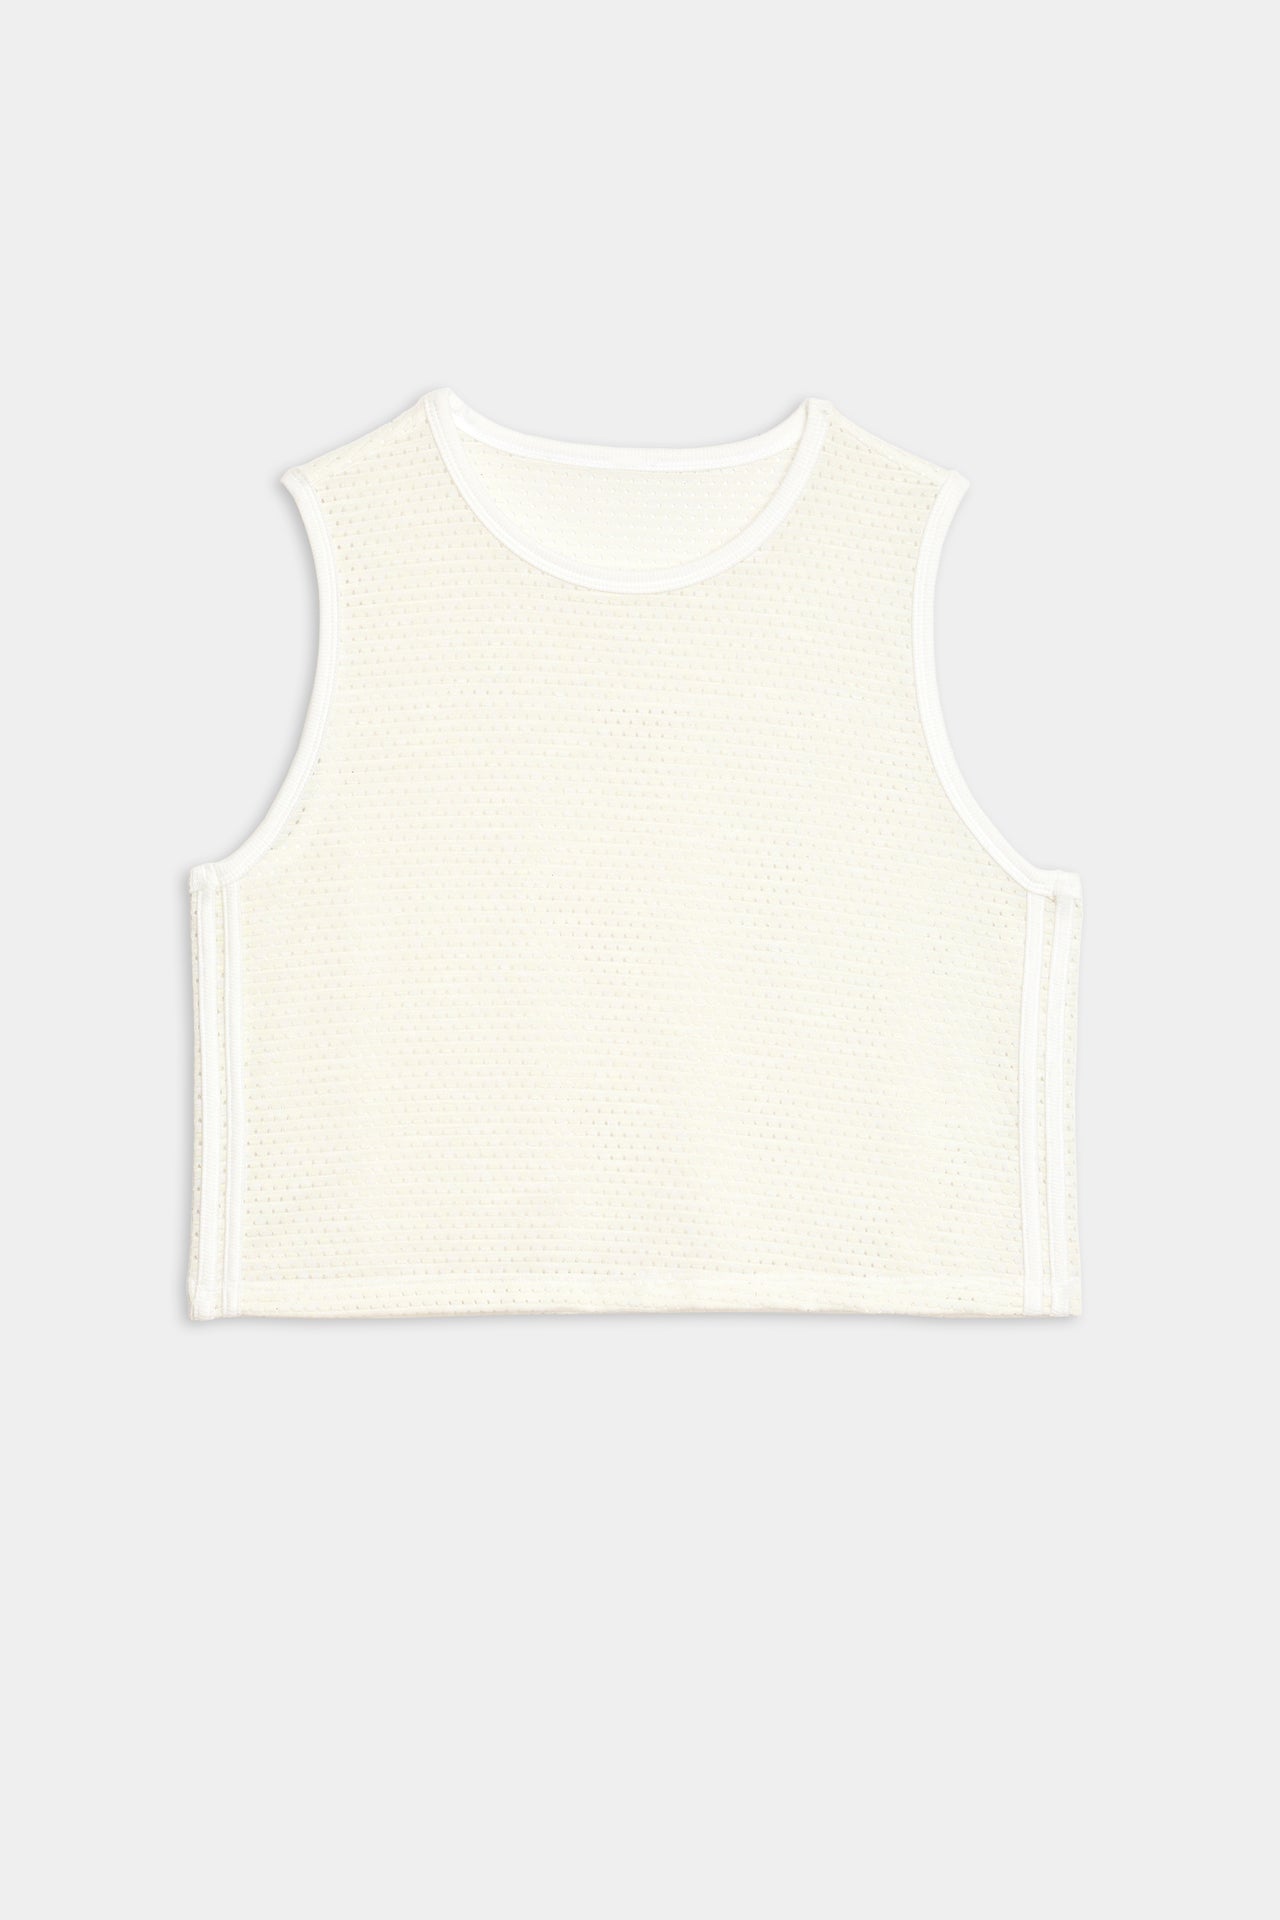 A SPLITS59 Logan Mesh Tank With Stripe - White on a white background, perfect for breathability during workouts.